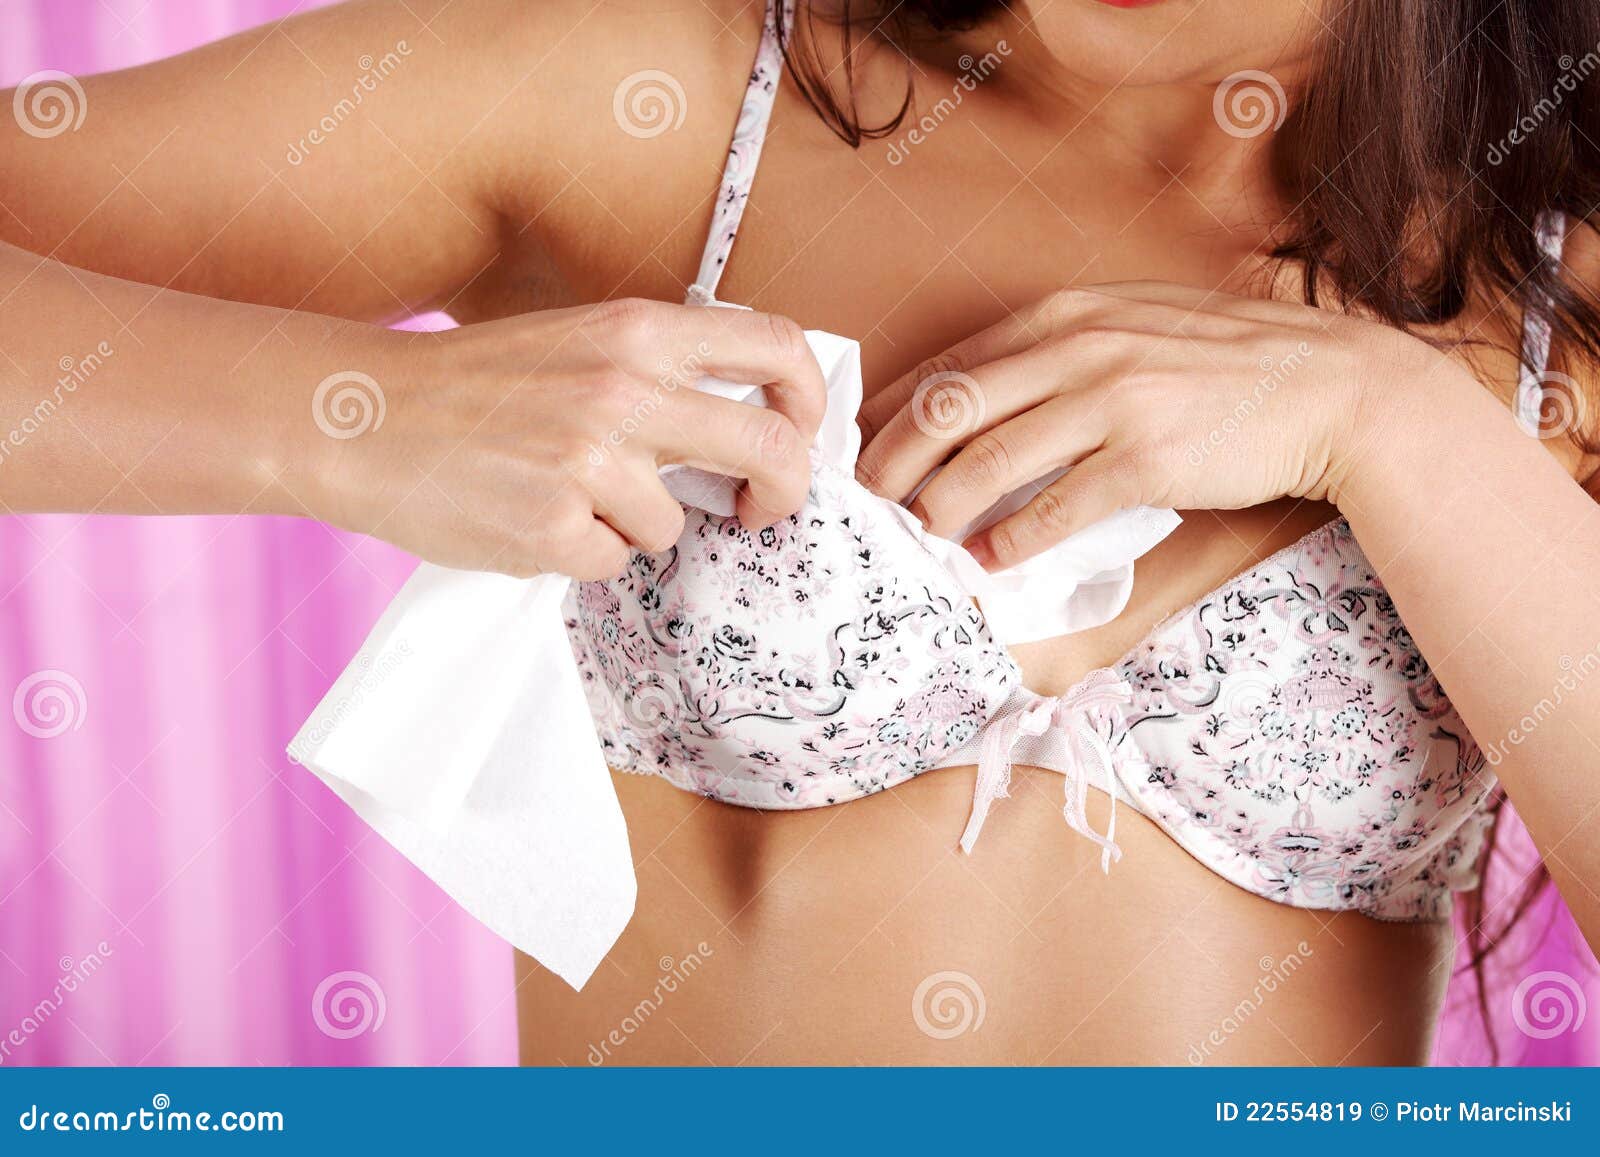 Woman Stuffing Bra with Tissue Stock Image - Image of figure, indoors:  22554819